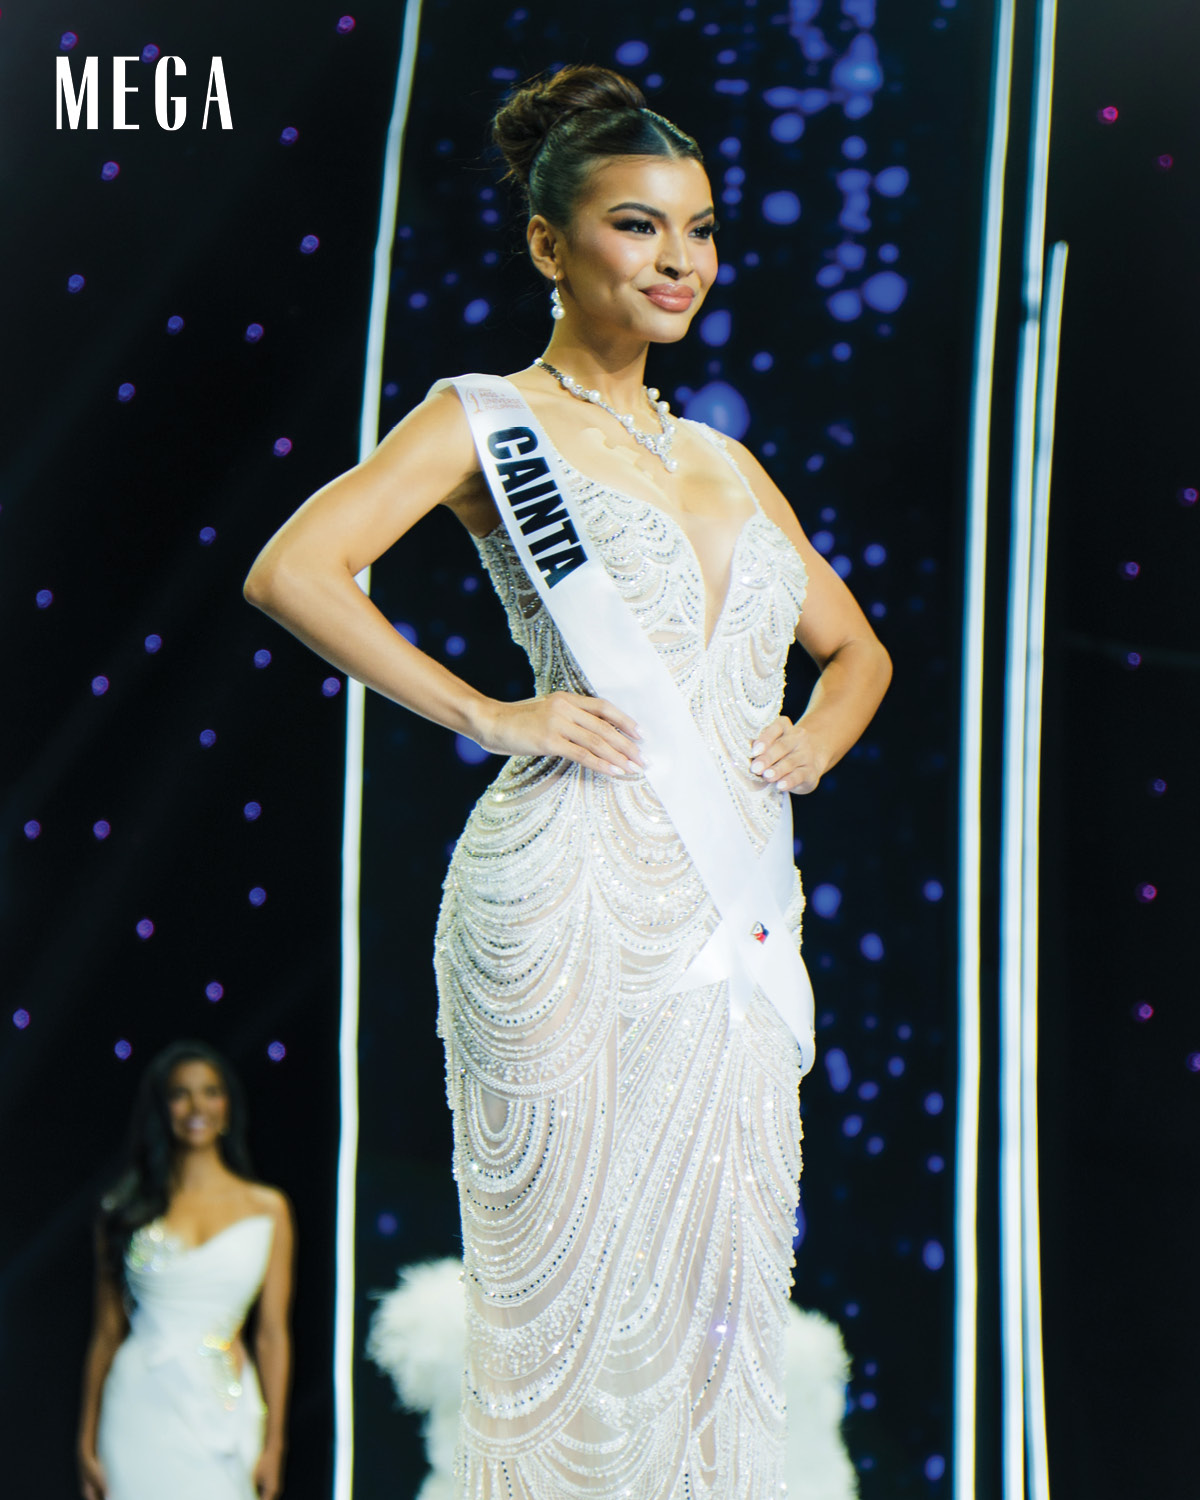 Stacey Gabriel Miss Universe Philippines refuse crown Cainta after competition statement